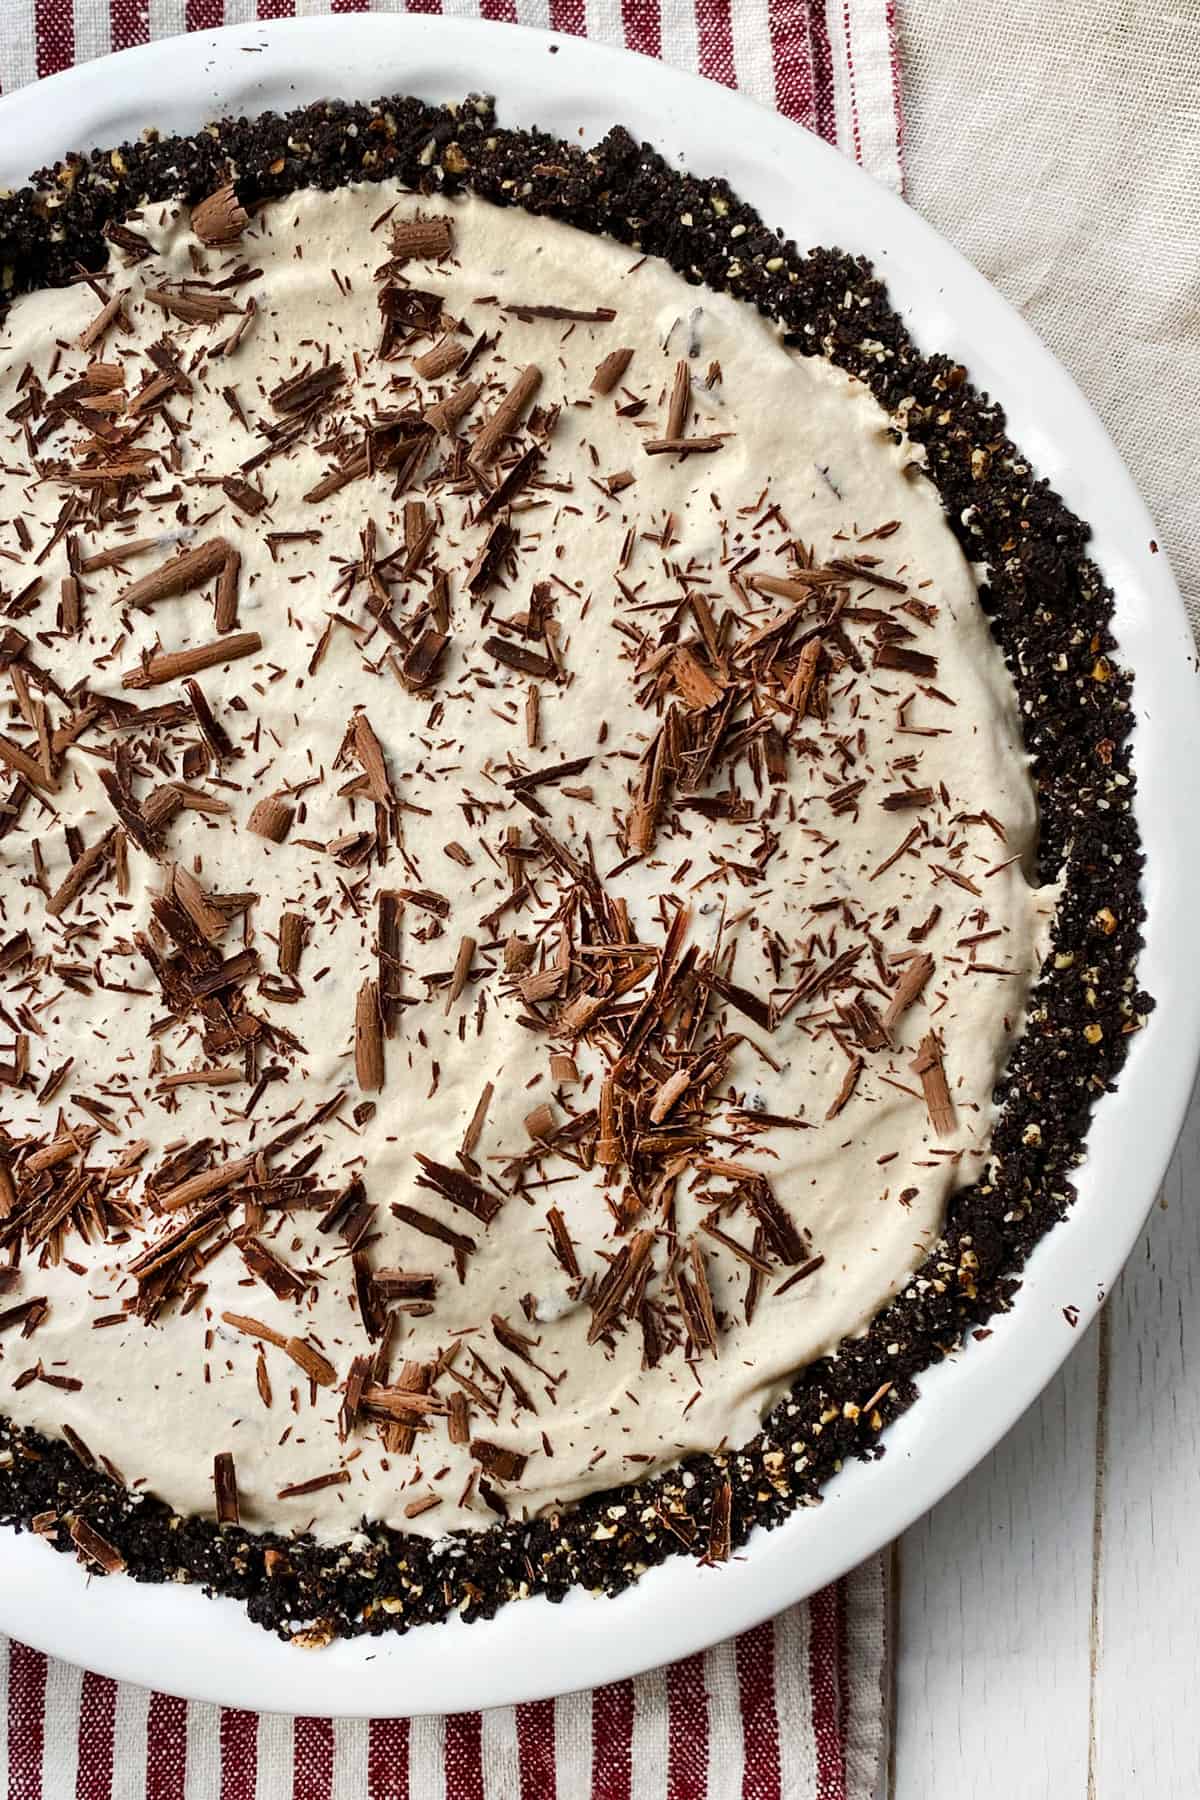 Overhead shot of a frozen mocha cream pie, topped with chocolate shavings, with chocolate cookie crumb crust.